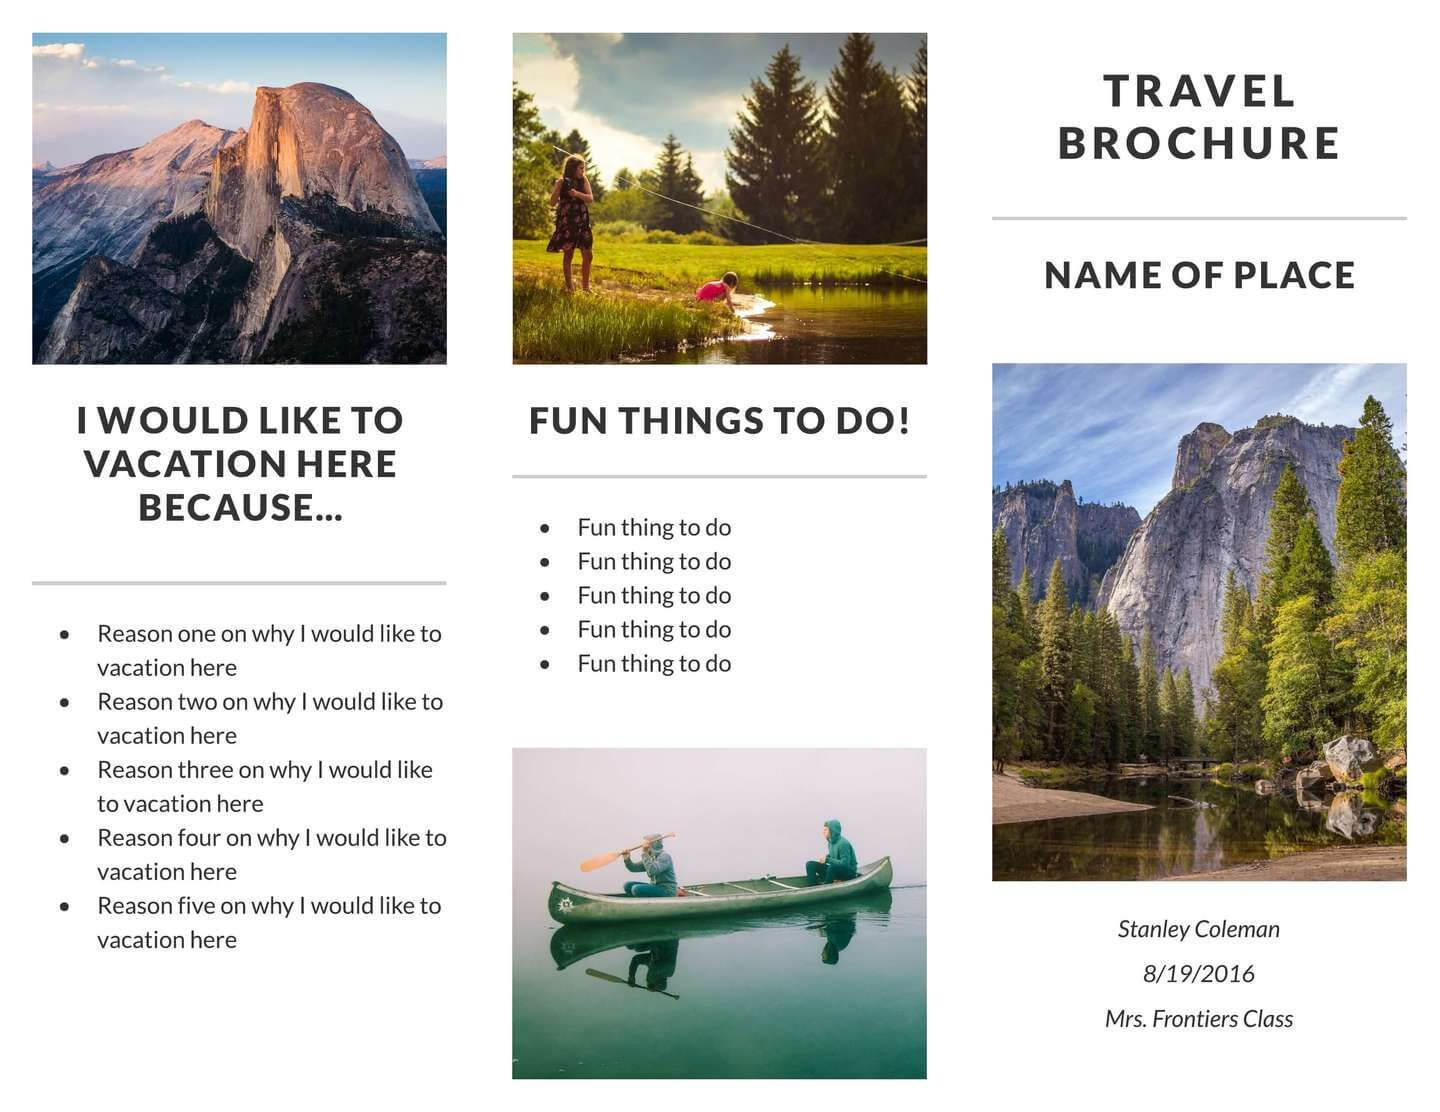 Free Brochure Templates & Examples | Free Marketing Regarding Travel And Tourism Brochure Templates Free